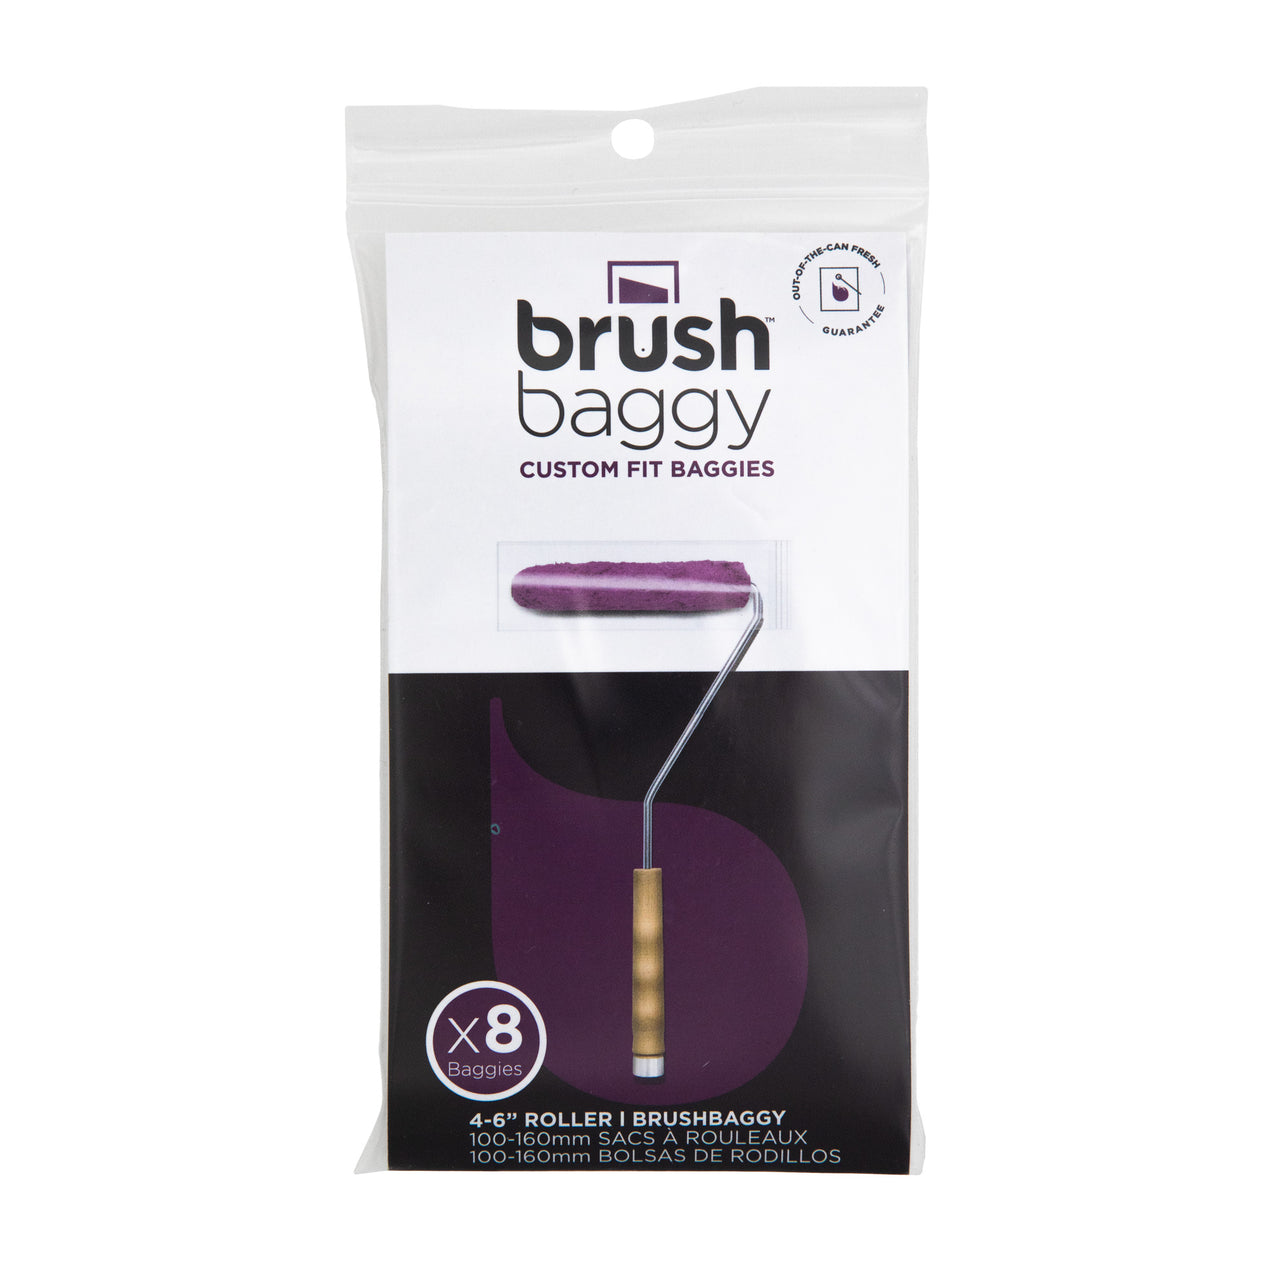 Brush Baggy 4-6" Cover